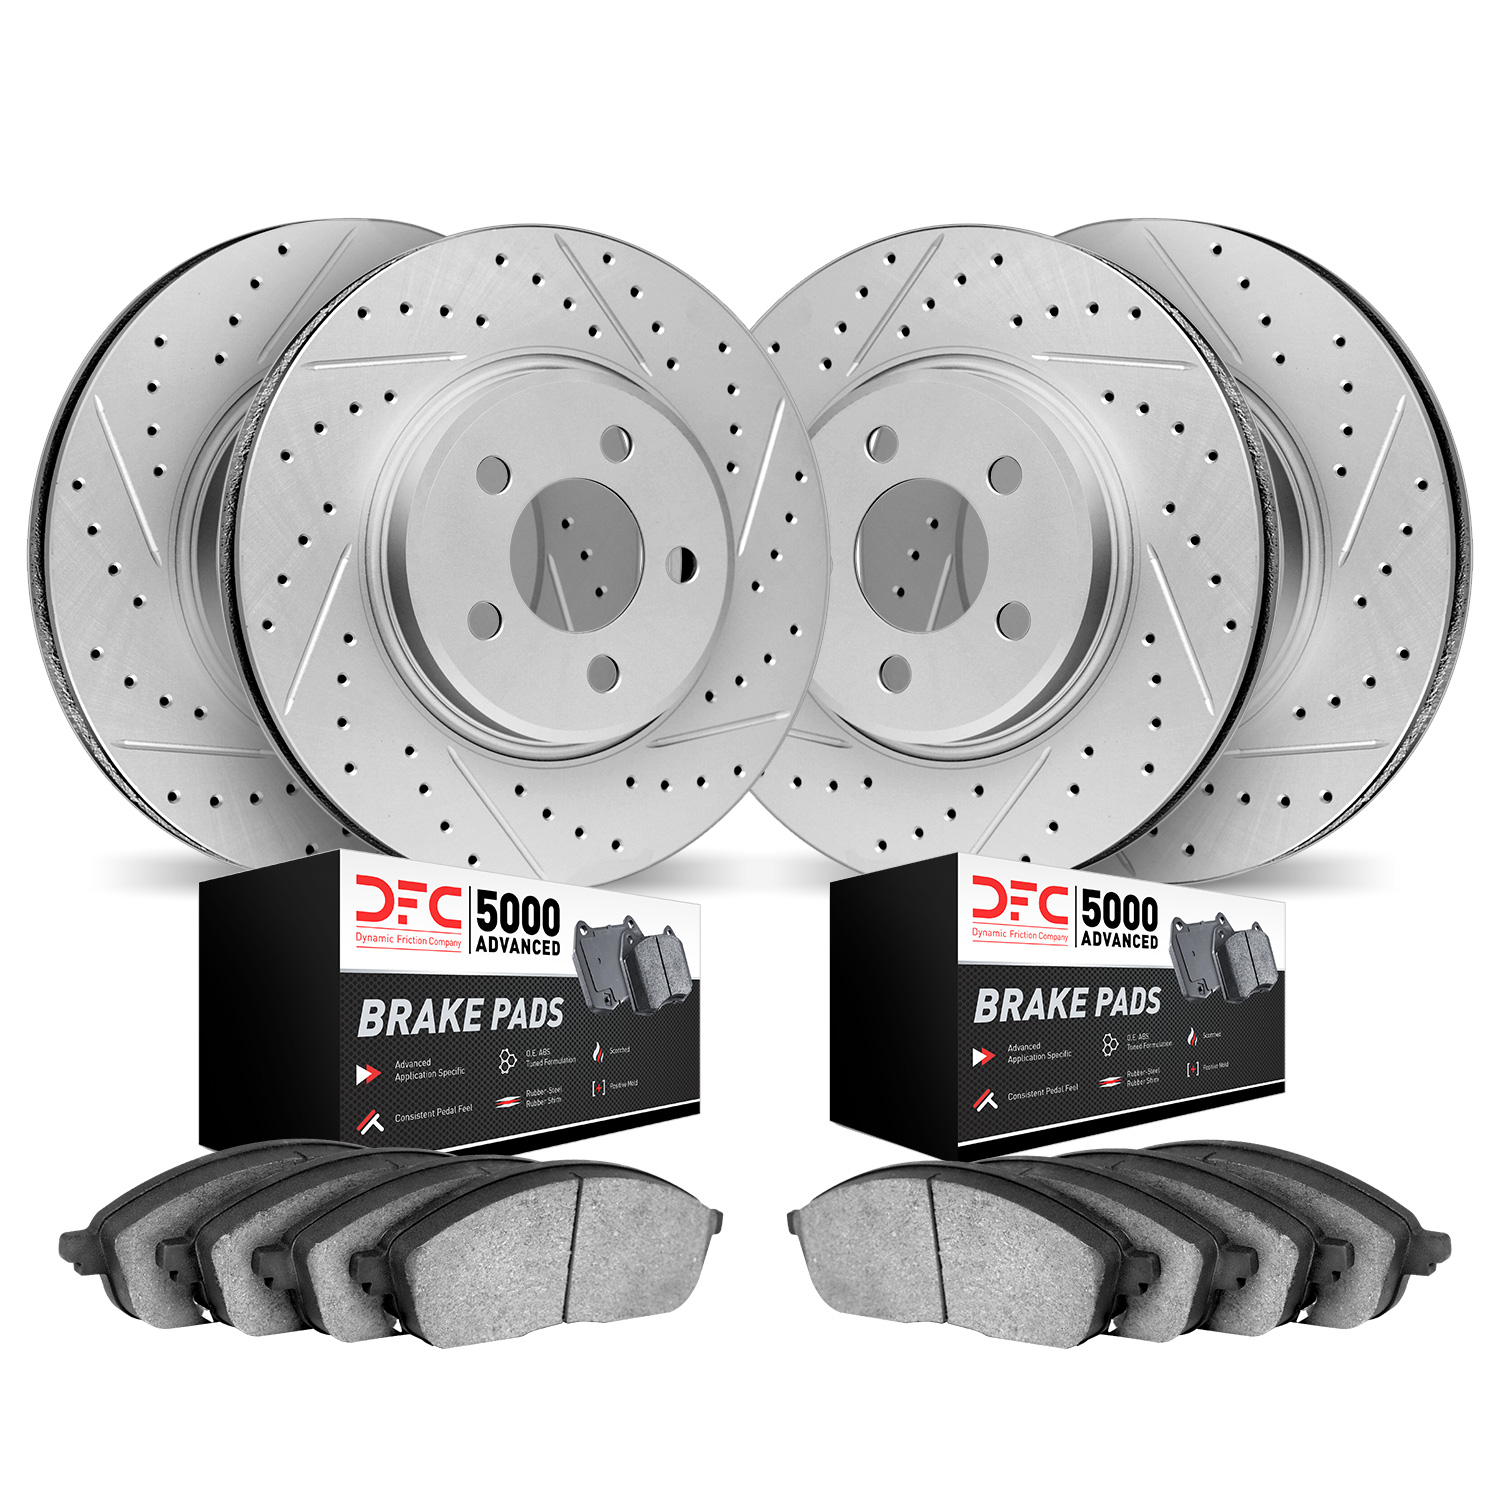 2504-20016 Geoperformance Drilled/Slotted Rotors w/5000 Advanced Brake Pads Kit, 2017-2019 Multiple Makes/Models, Position: Fron